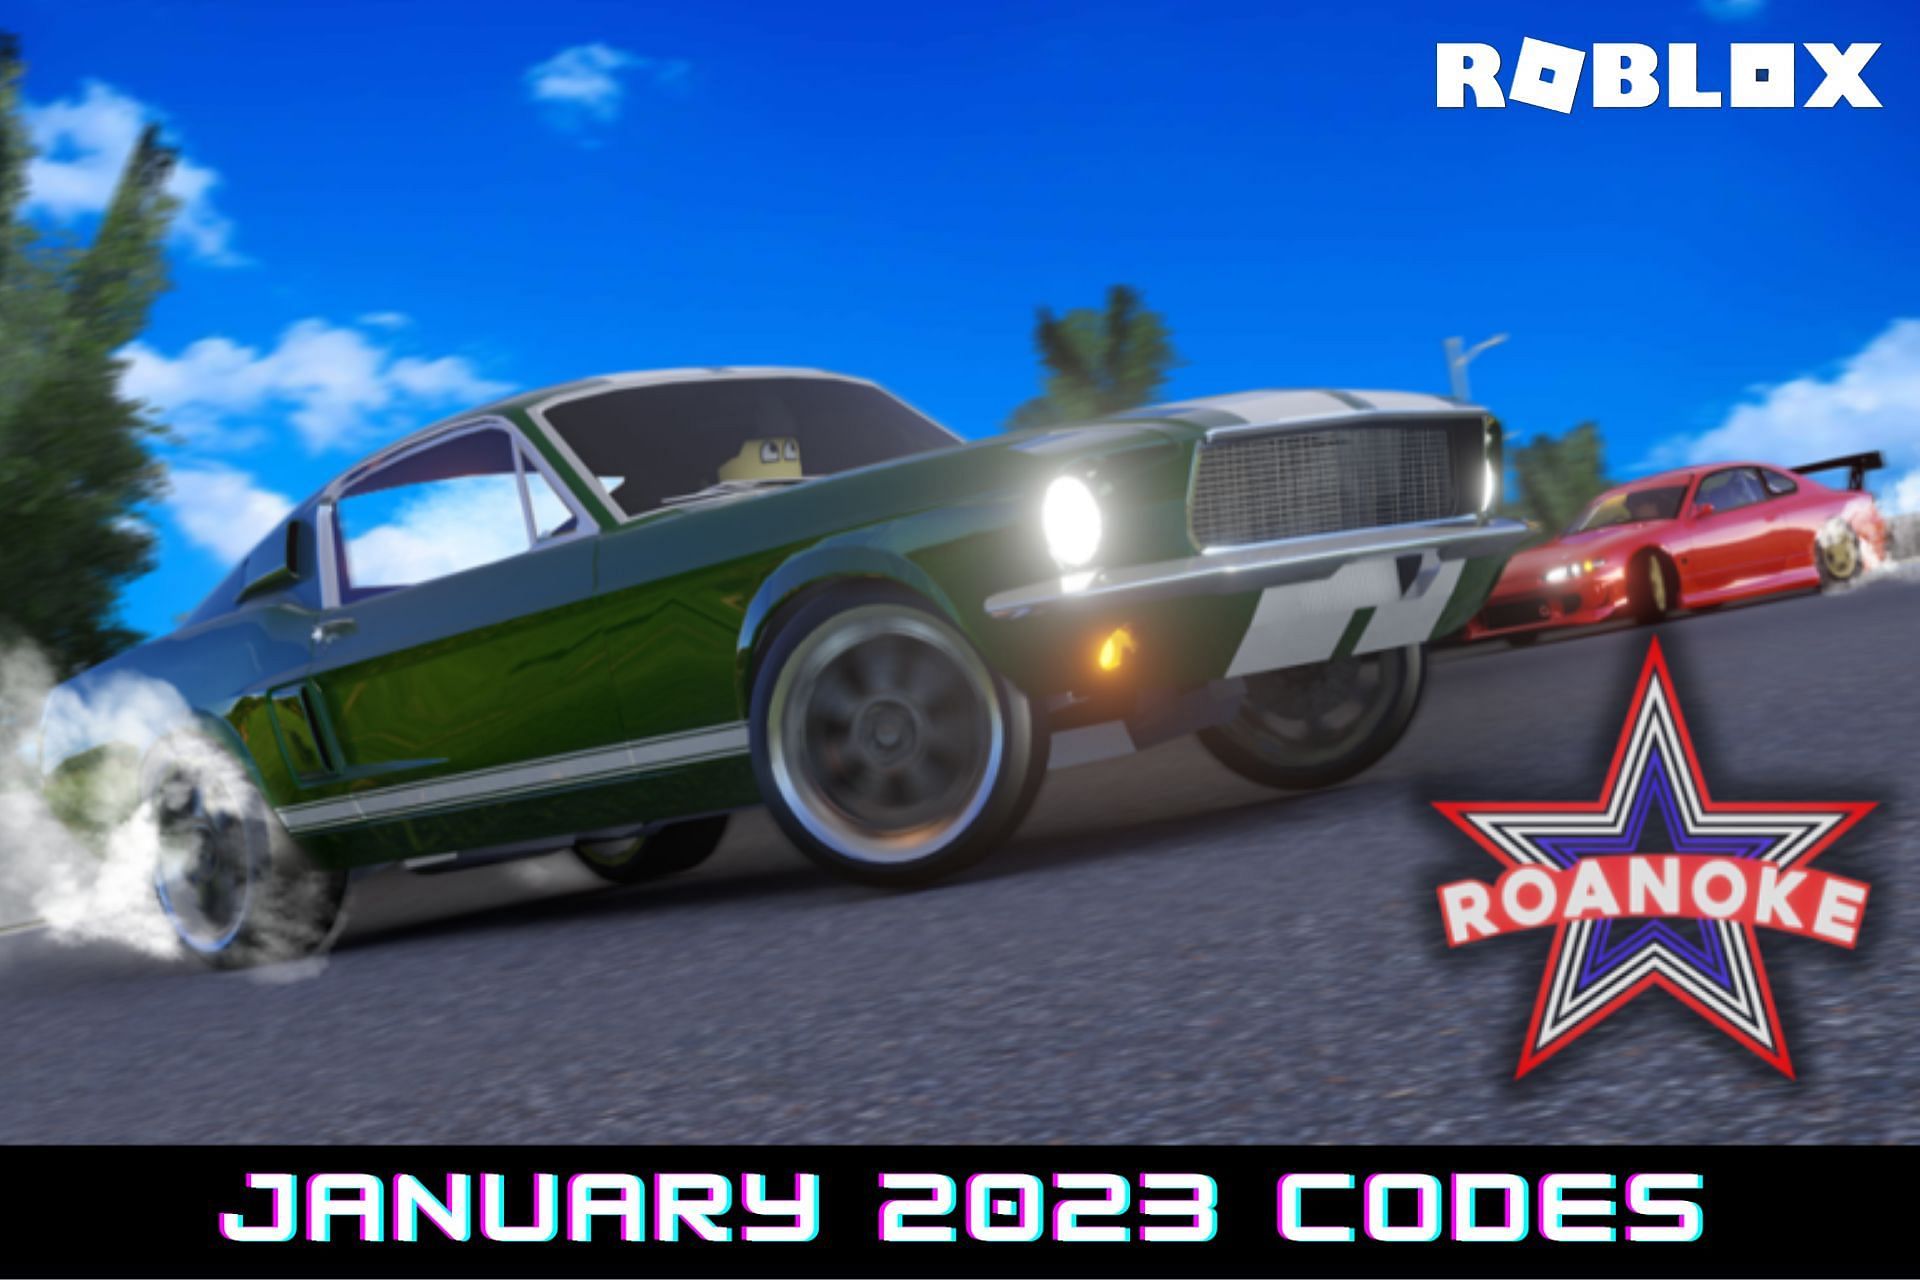 Roblox Roanoke codes for January 2023 Free cash